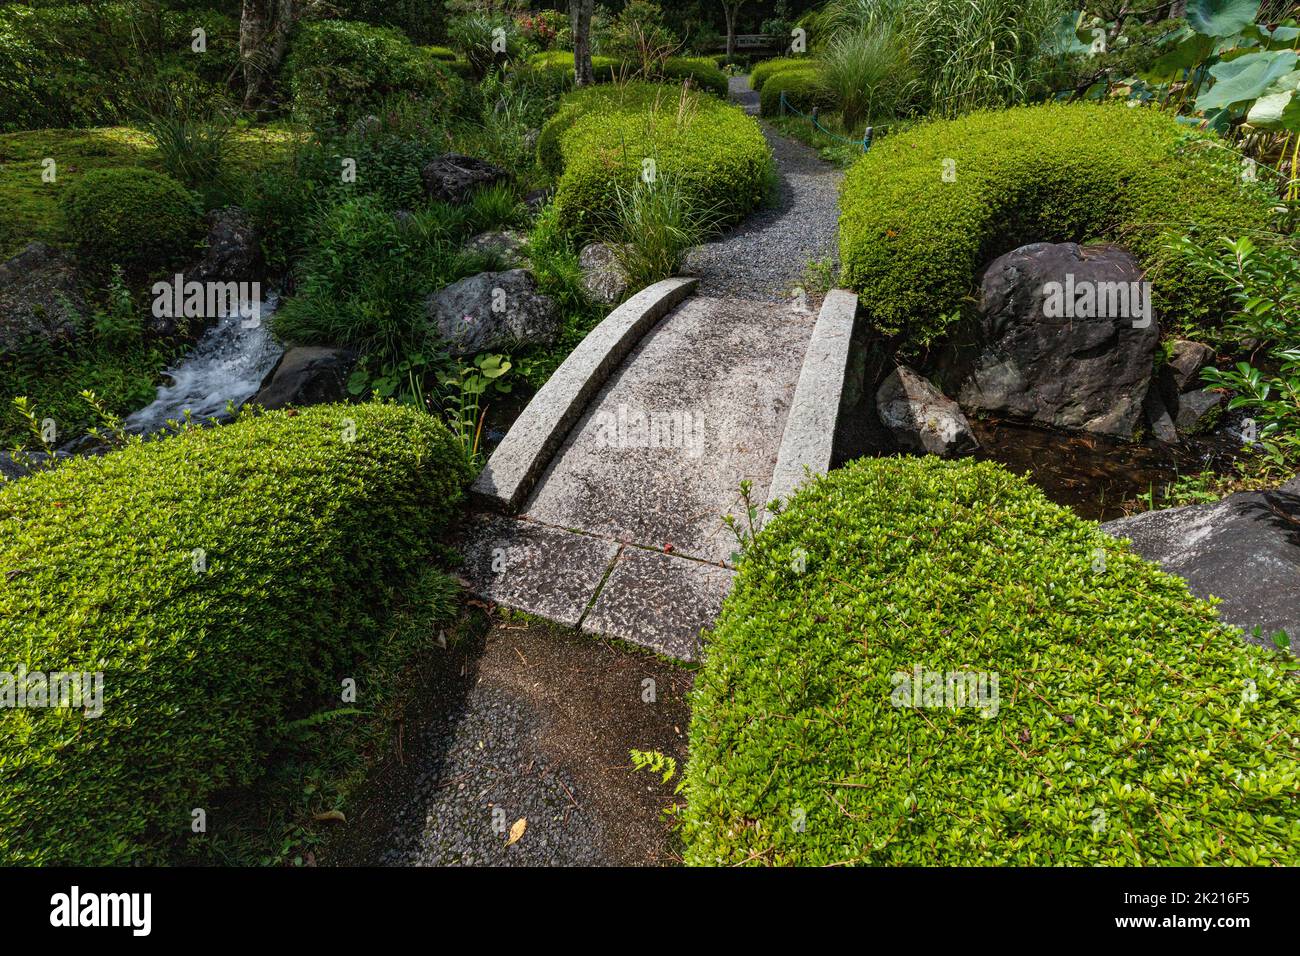 Suirakuen - This is a garden in the Japanese traditional style that reflects Sadanobu Matsudaira's philosophy of gardening. This garden is located in Stock Photo